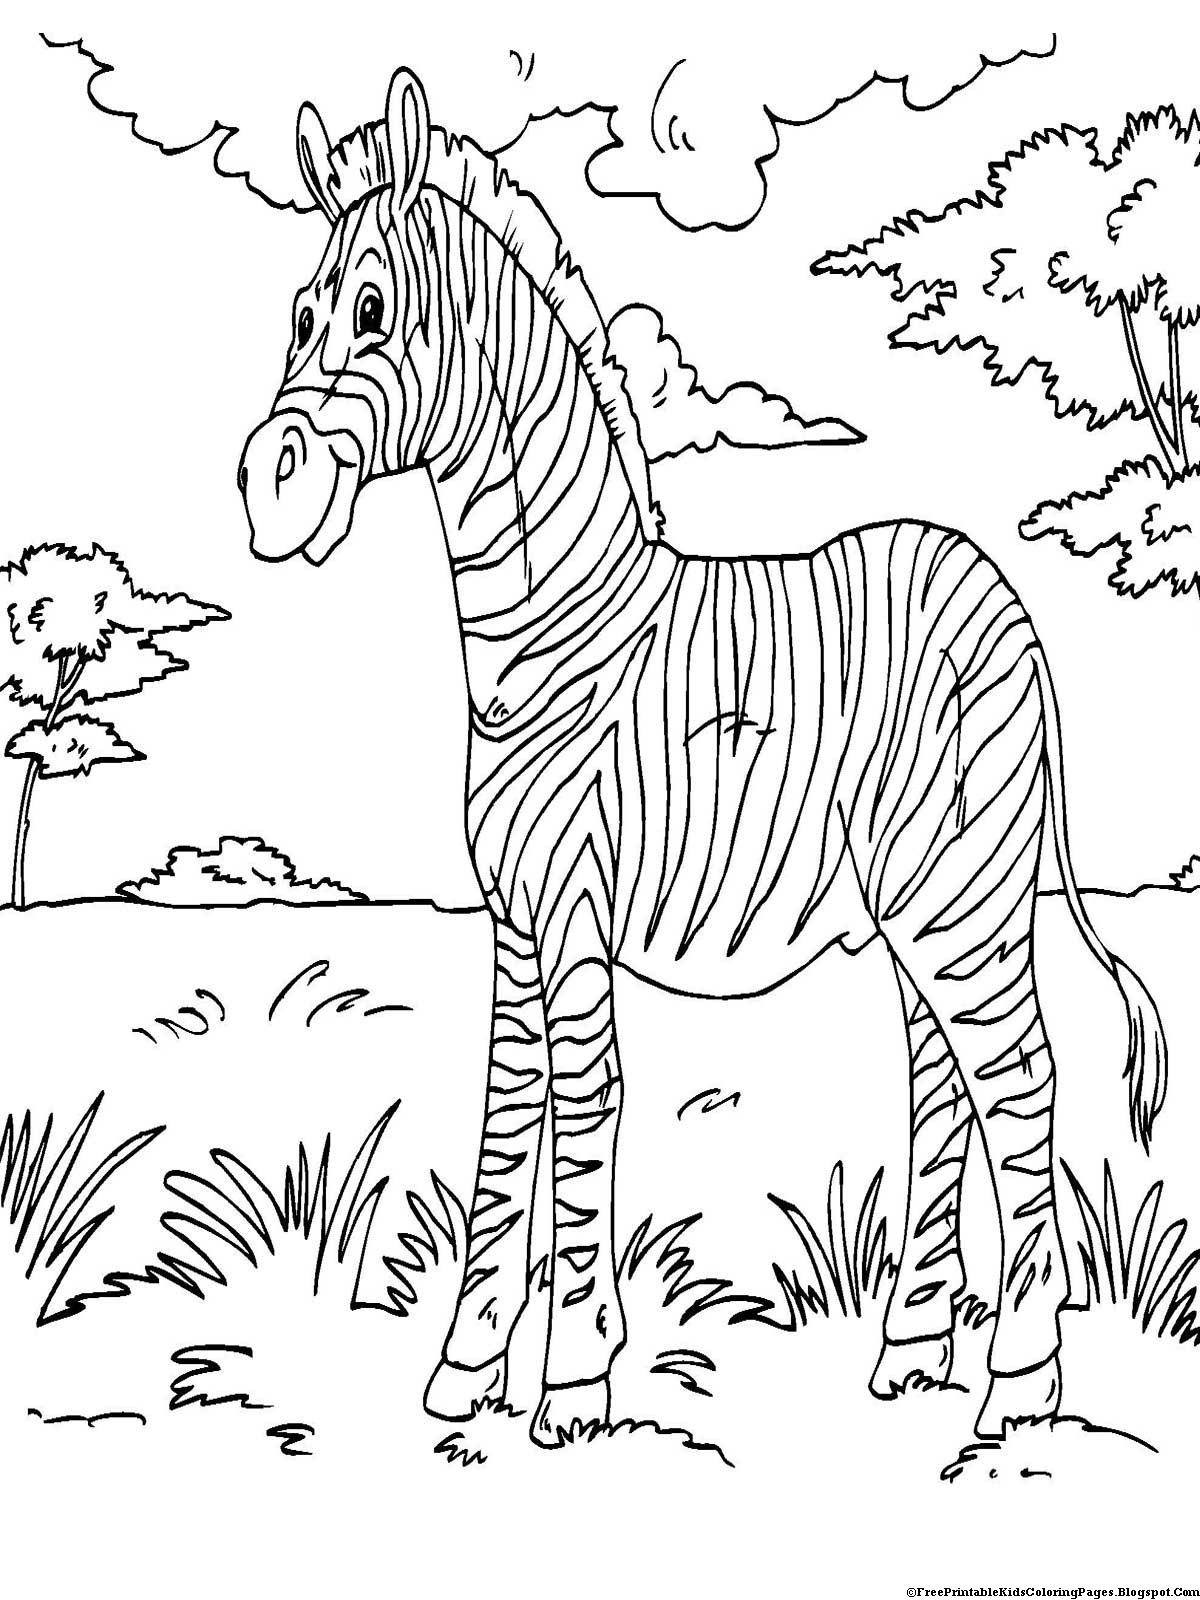 Coloring Pages For Toddlers Printable
 Zebra Coloring Pages Free Printable Kids Coloring Pages